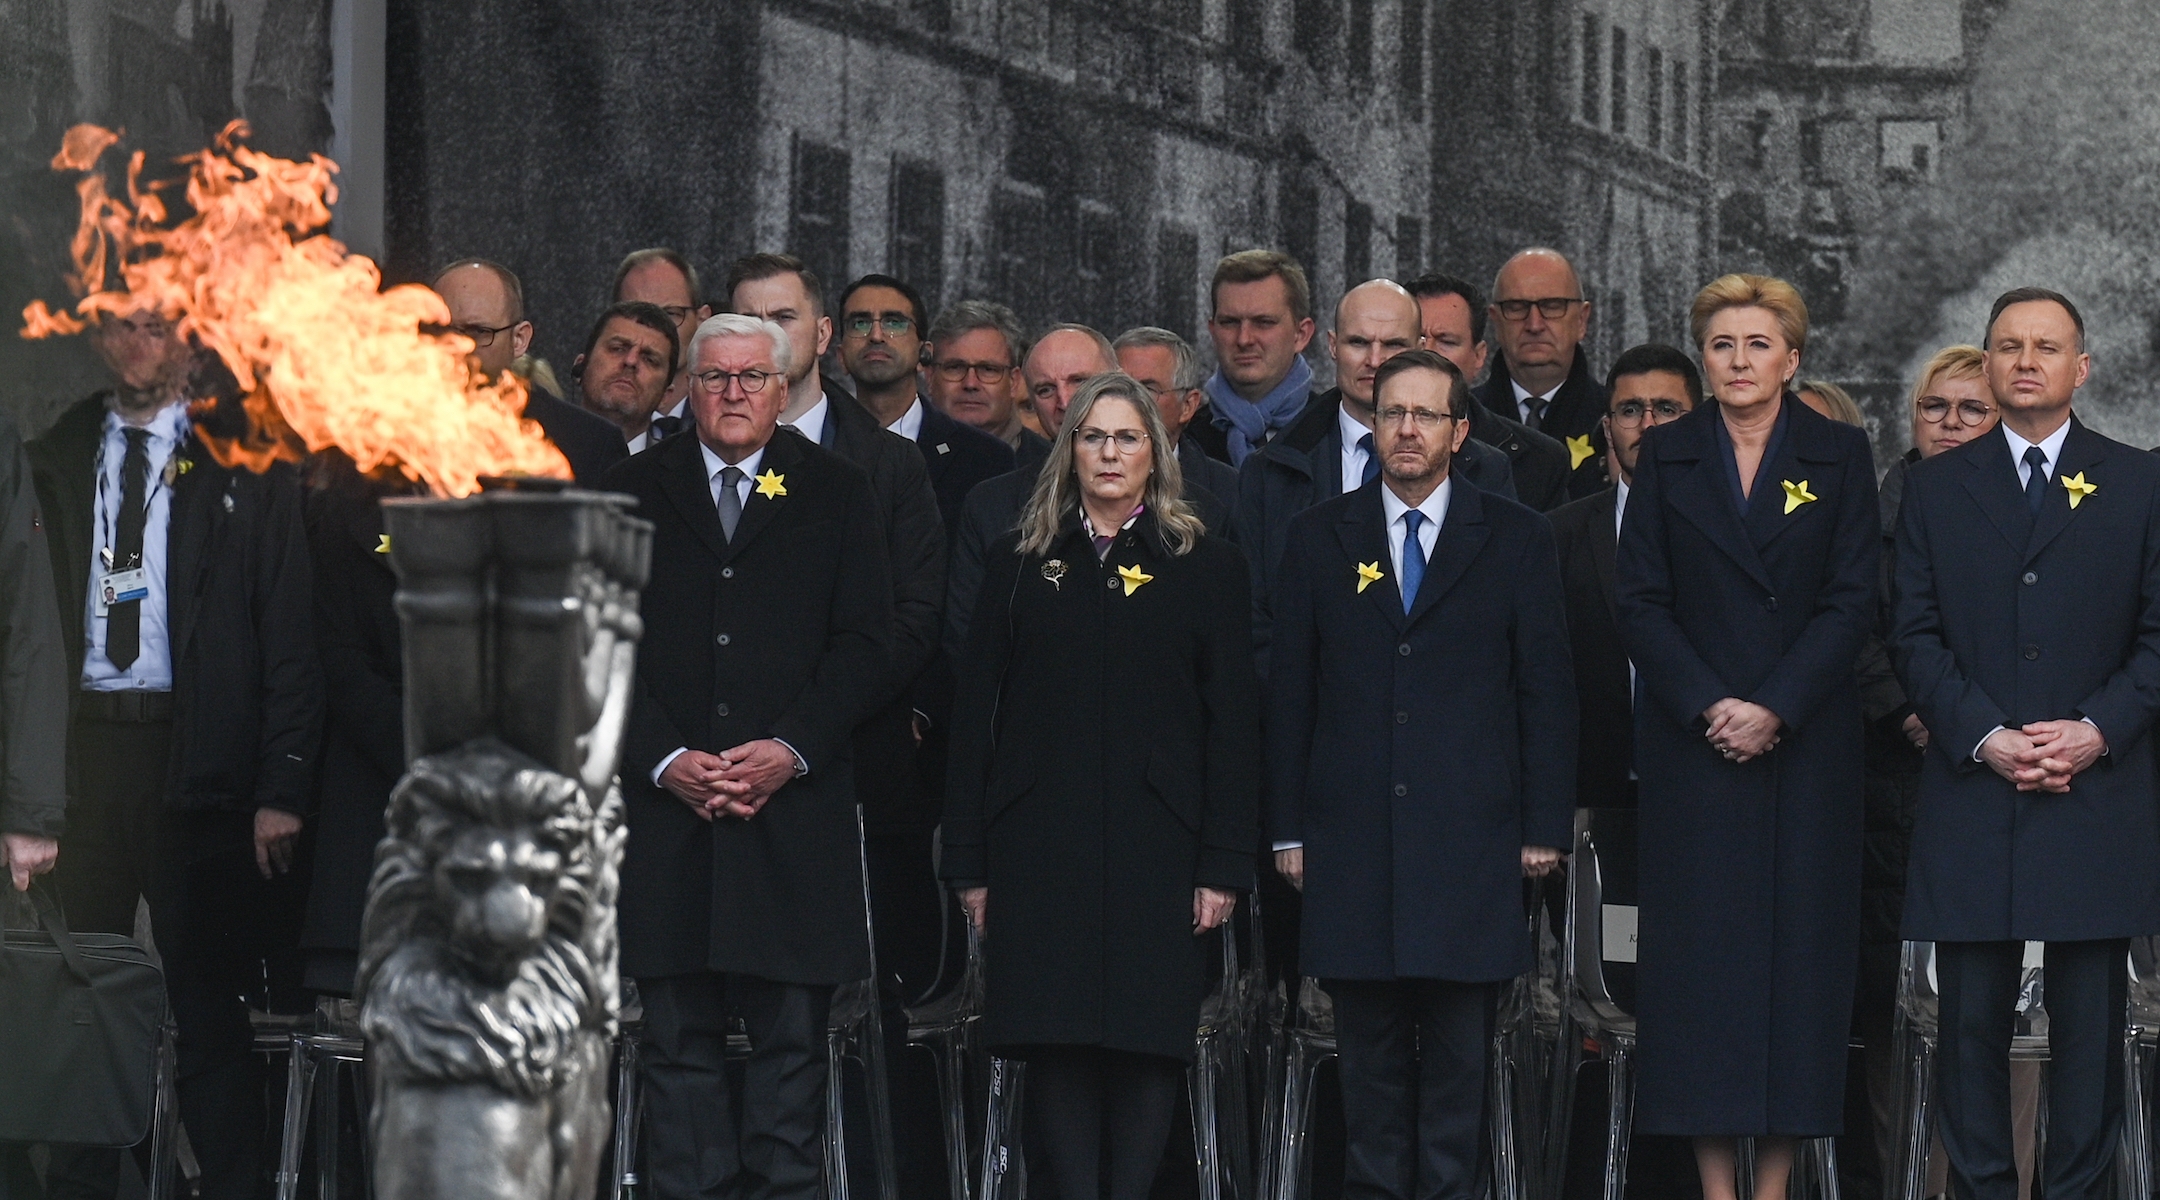 A few hundred politicians, Jewish leaders and others marked the 80th anniversary of the Warsaw Ghetto Uprising at the Ghetto Heroes Monument in Warsaw, April 19, 2023. (Artur Widak/Anadolu Agency via Getty Images)